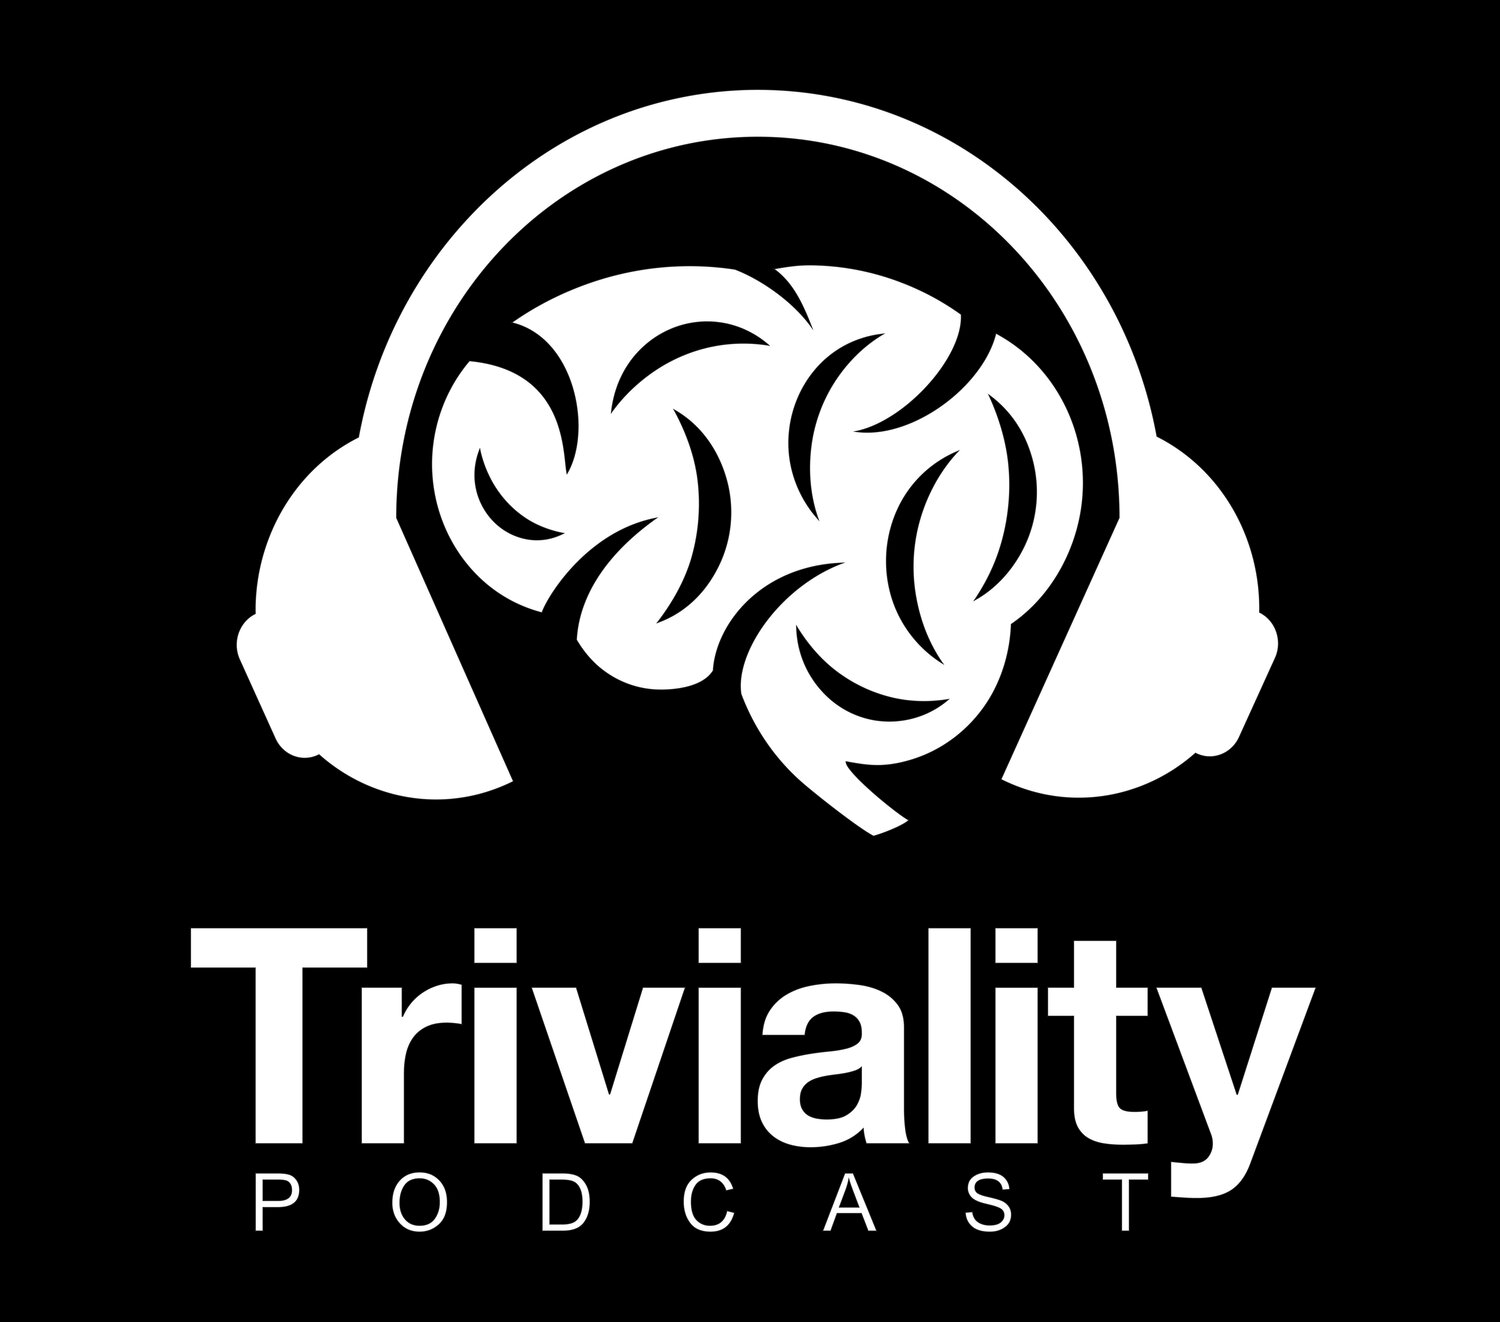 Triviality Podcast